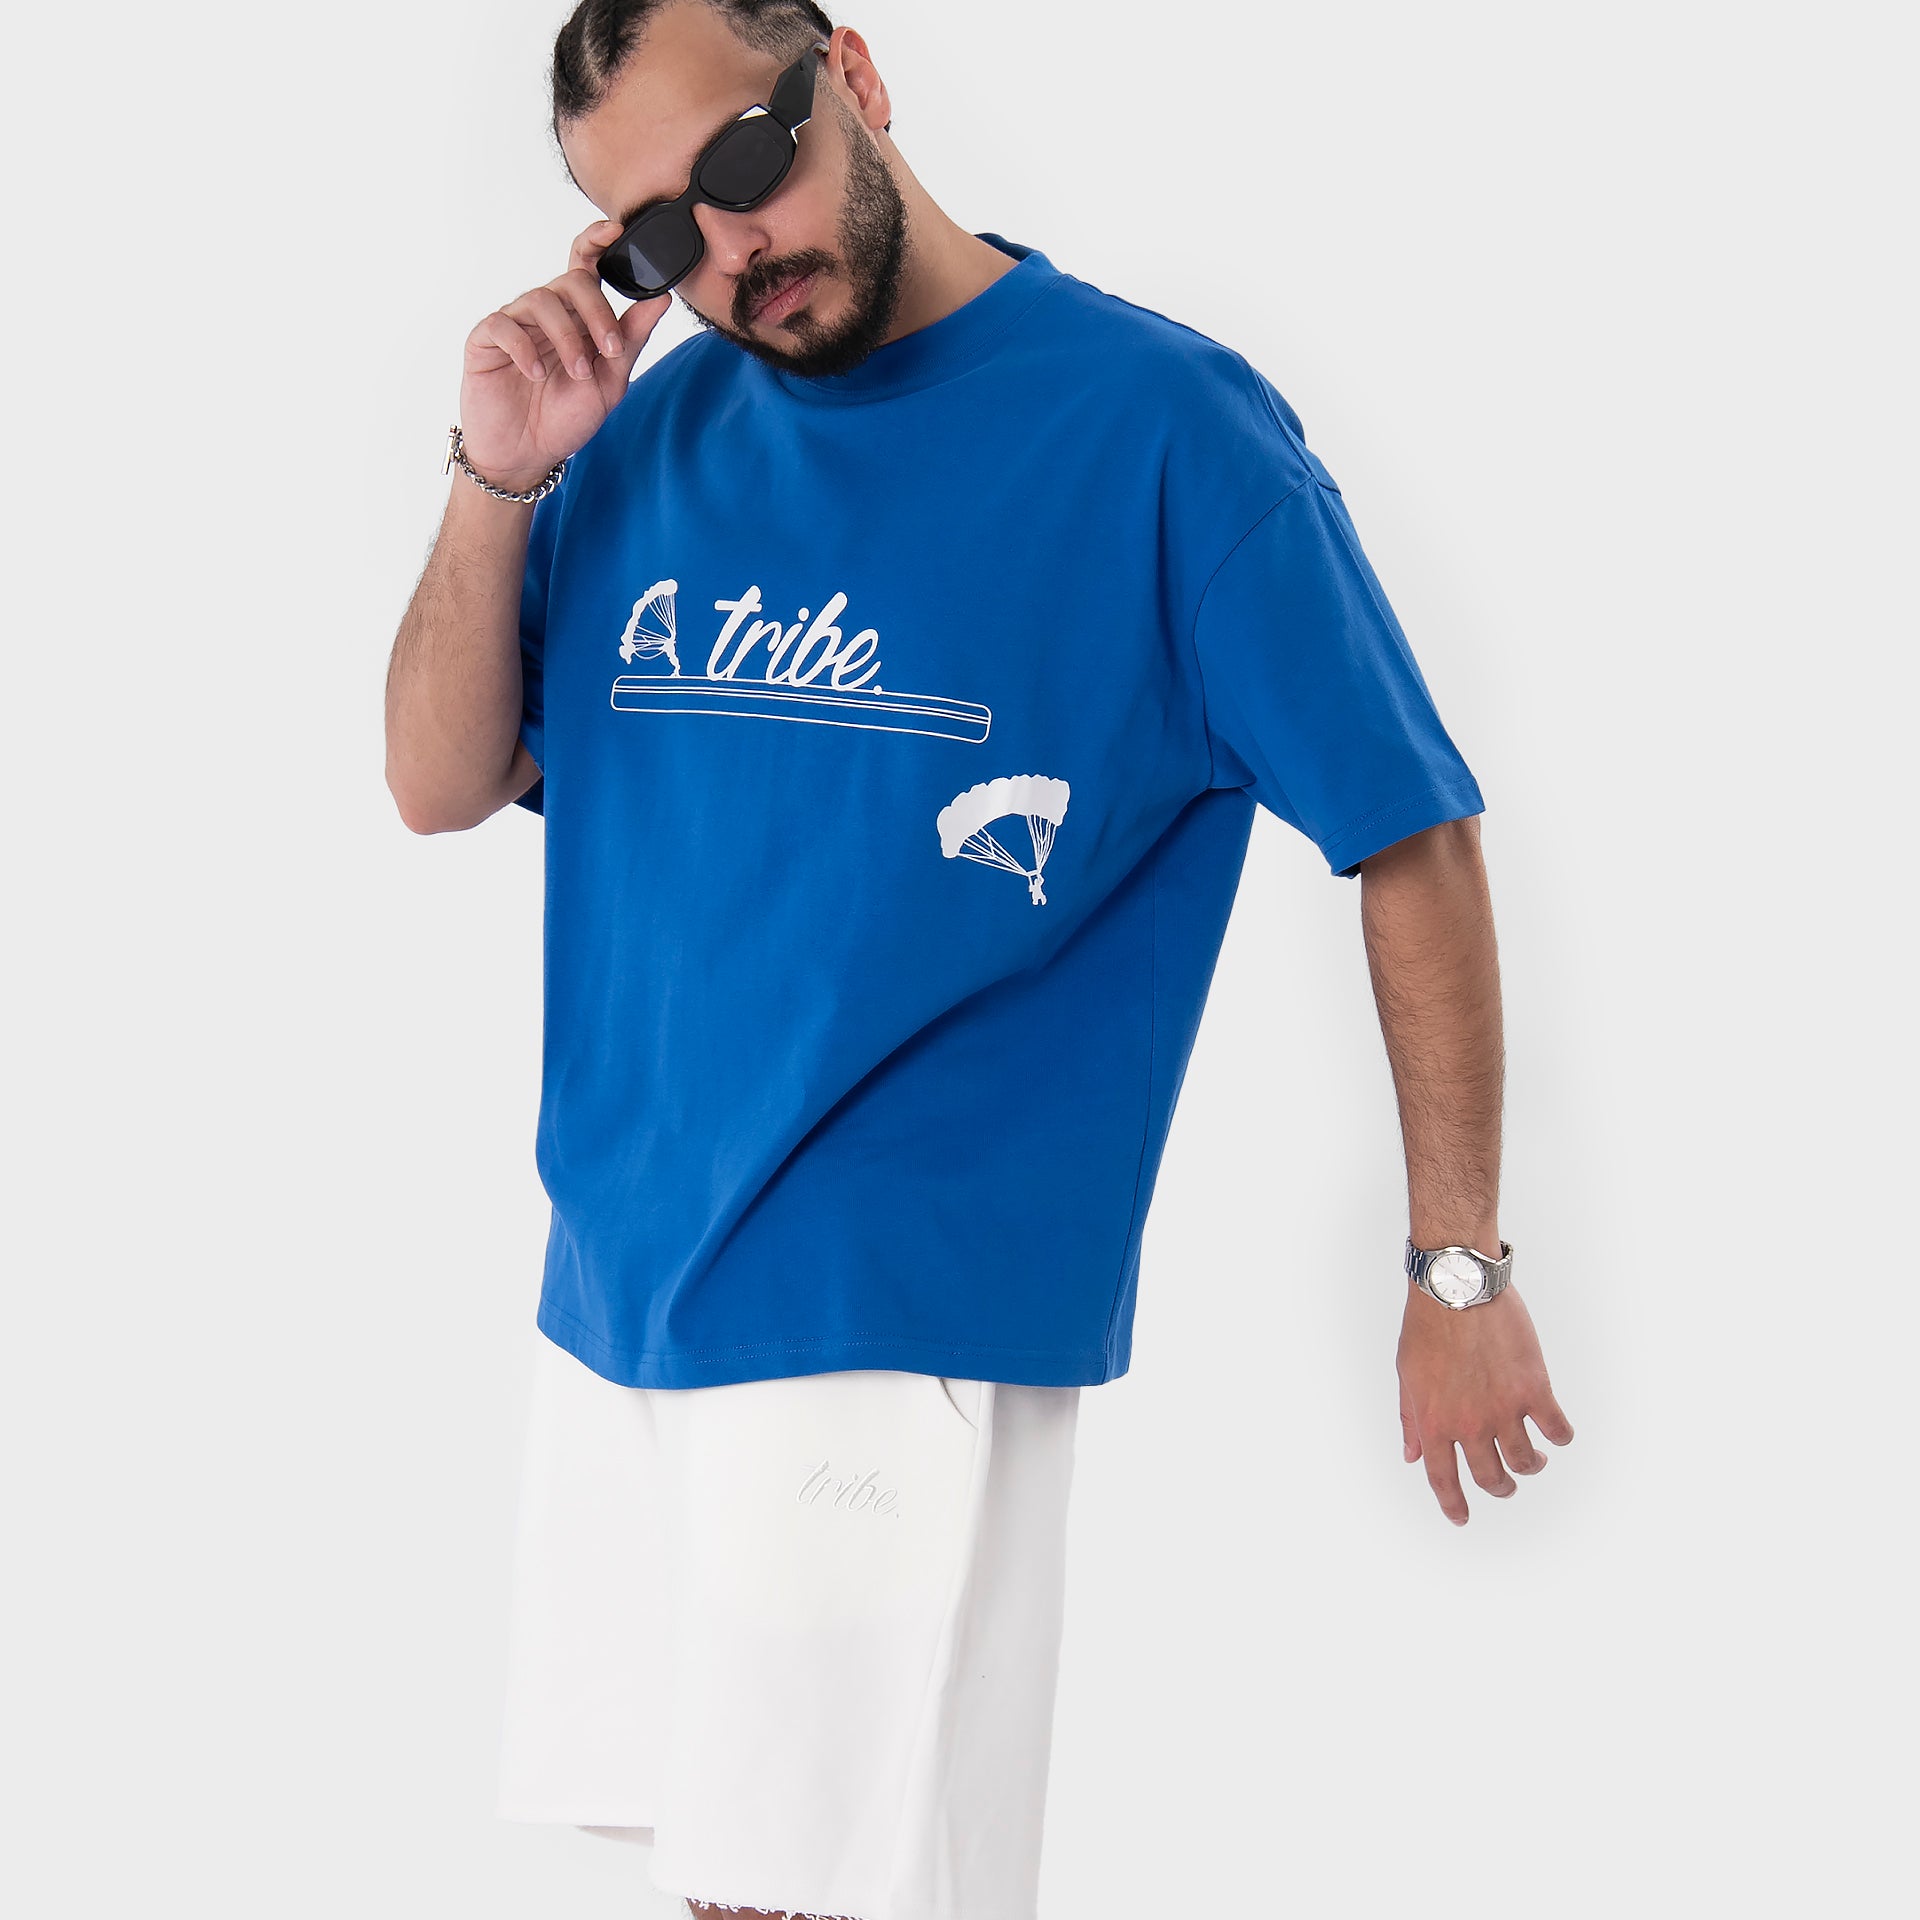 Blue Parachute T-shirt From Tribe